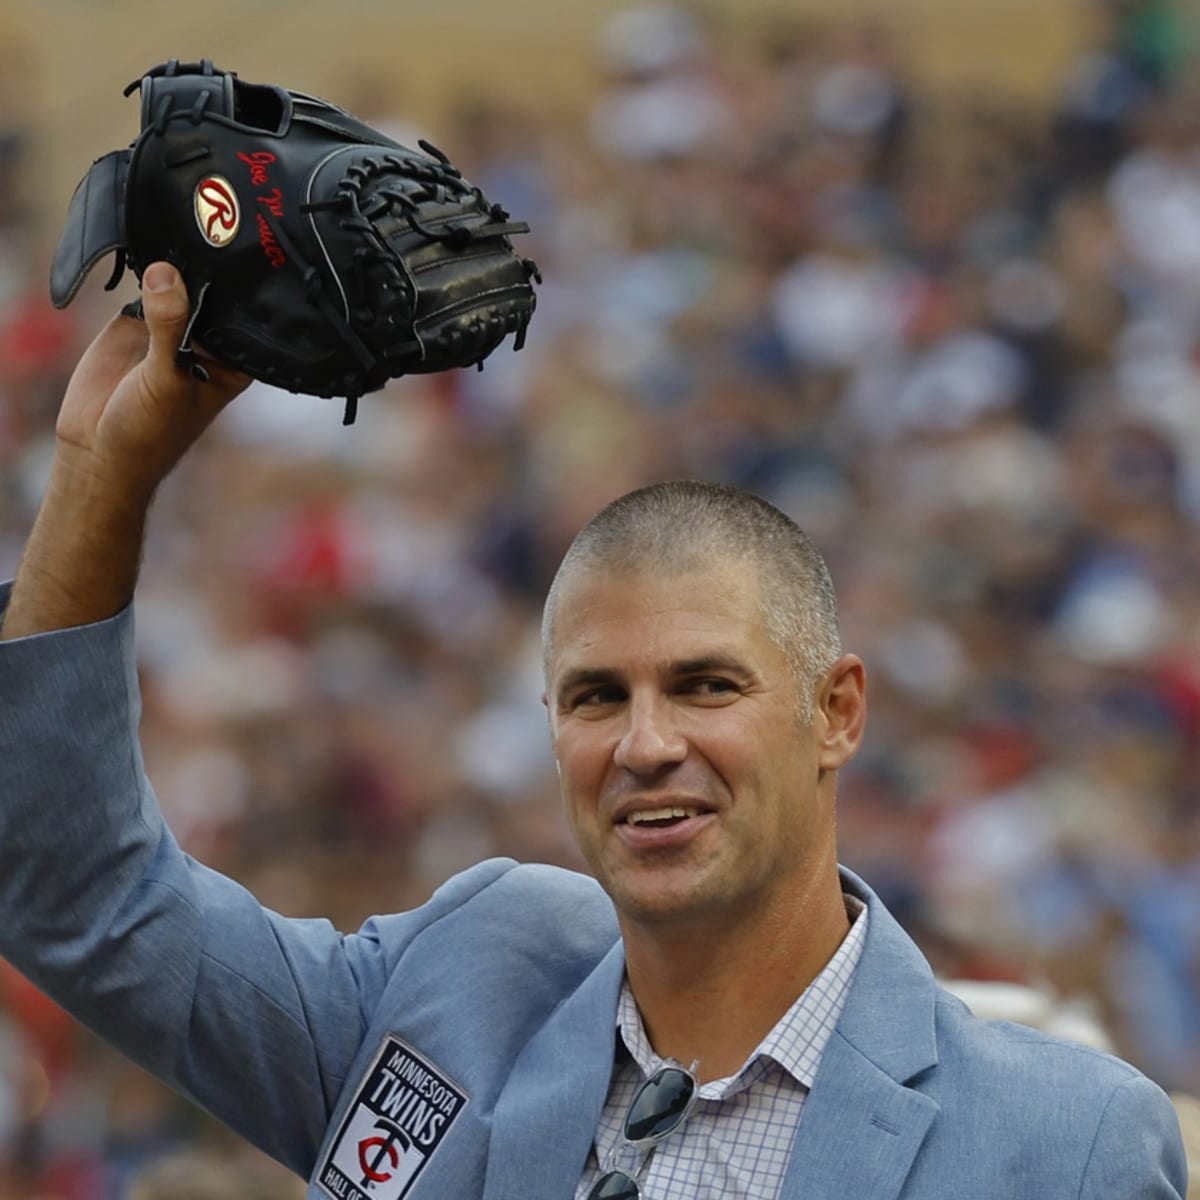 Joe Mauer Gives Emotional Speech Upon Being Inducted into